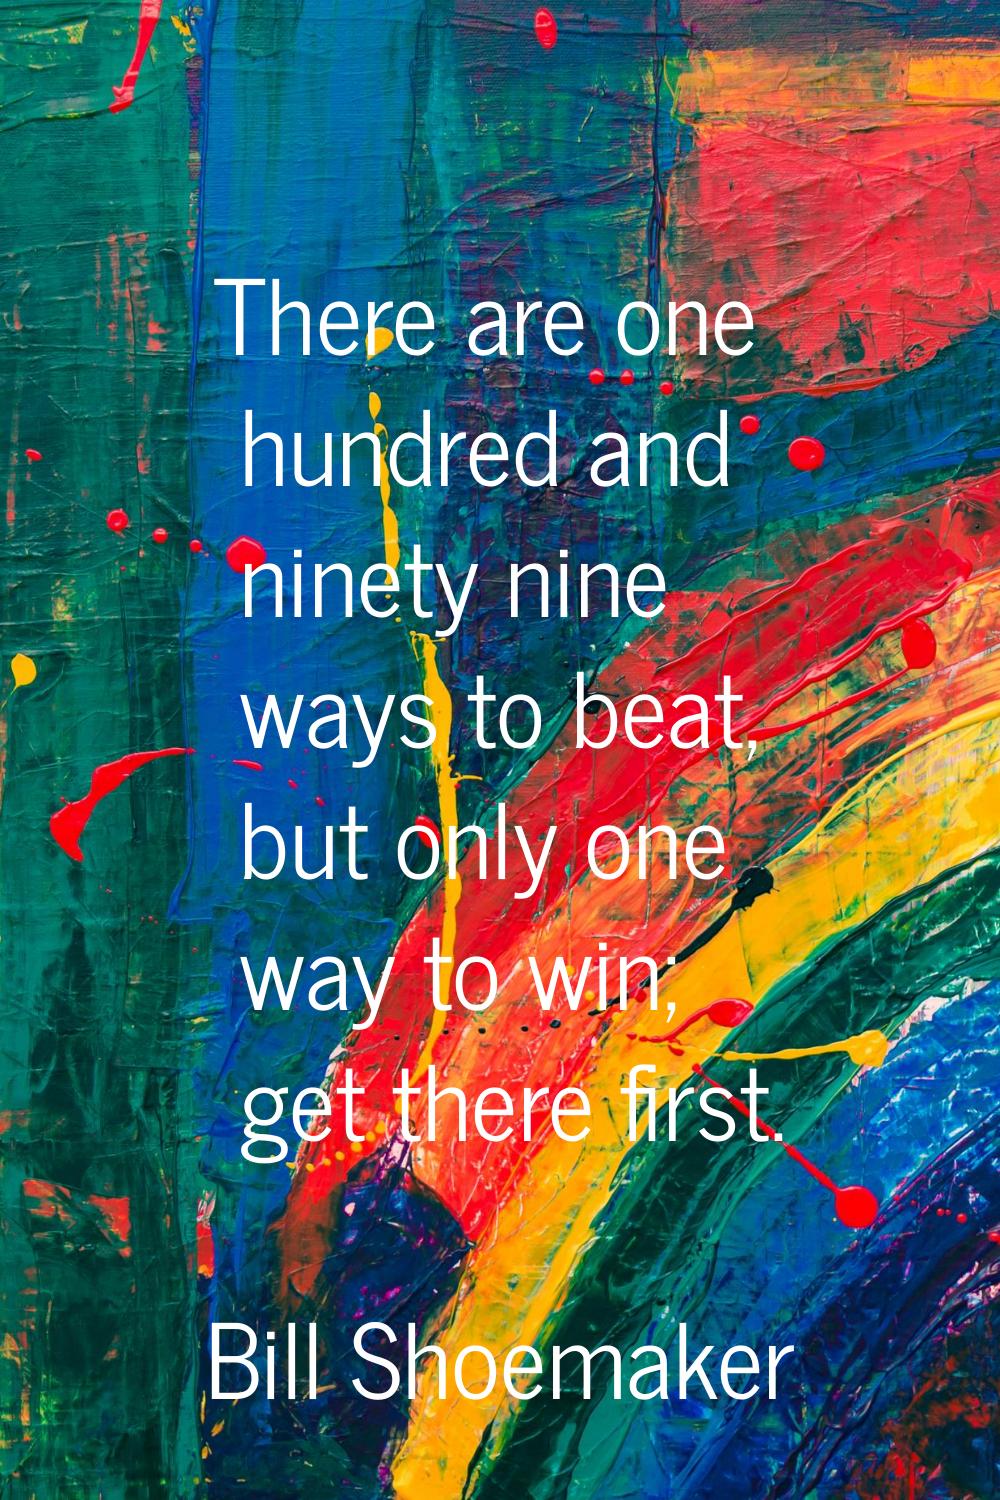 There are one hundred and ninety nine ways to beat, but only one way to win; get there first.